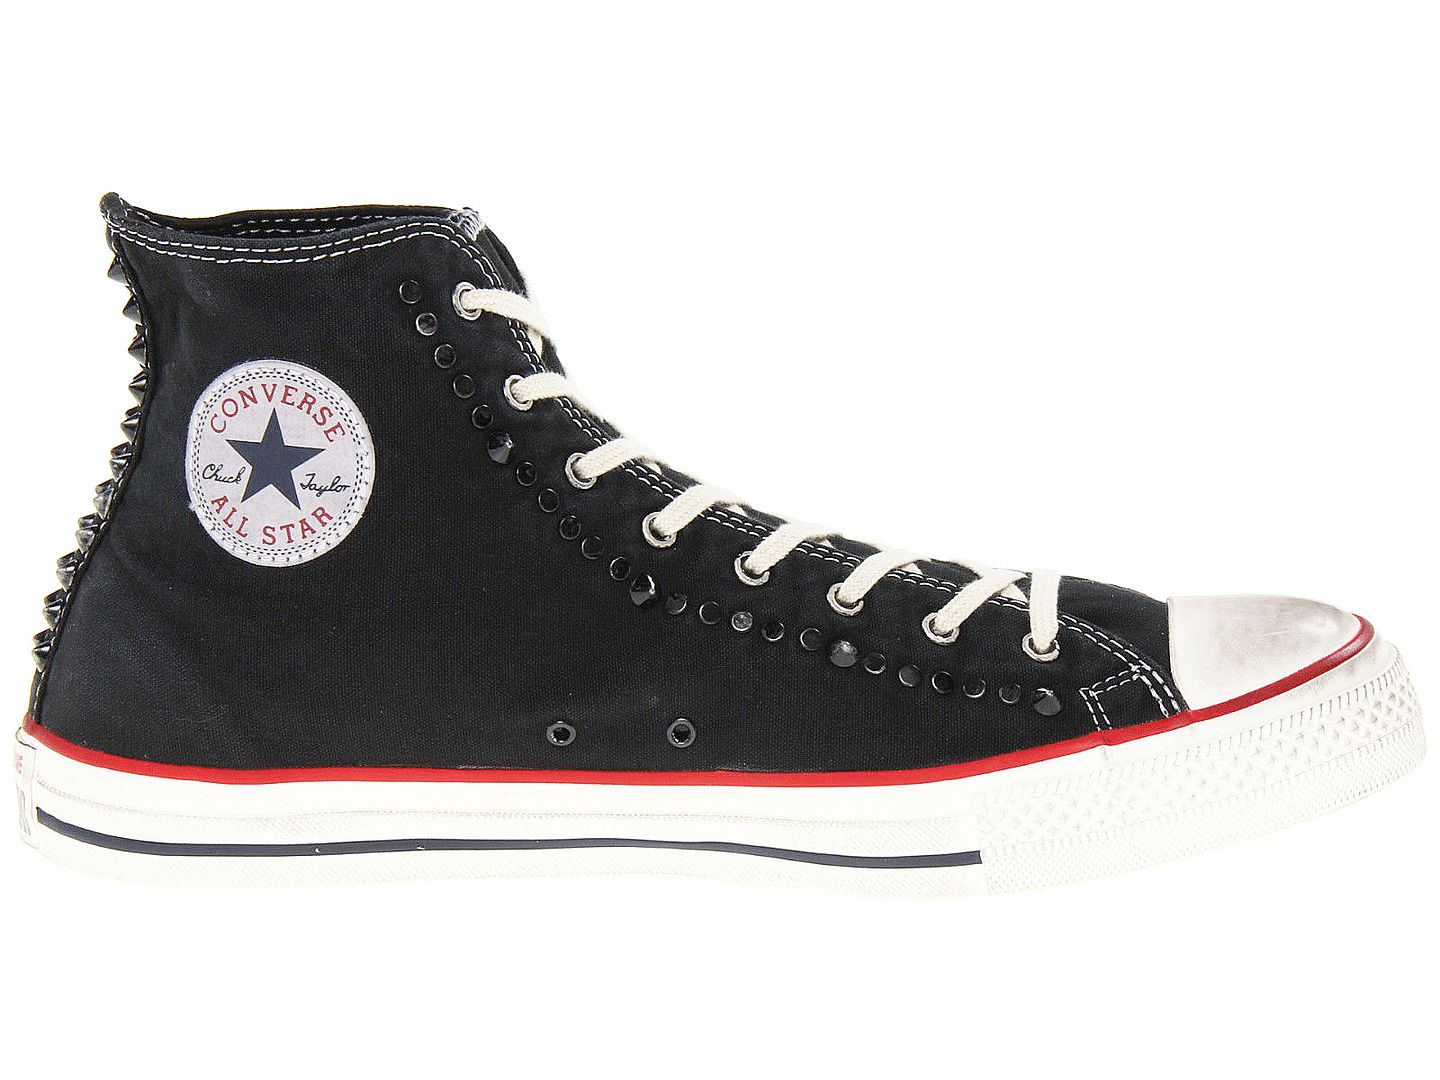 CONVERSE ~ Black CHUCK TAYLOR ALL STAR Hi Top SNEAKERS w/ SPIKES STUDS ...